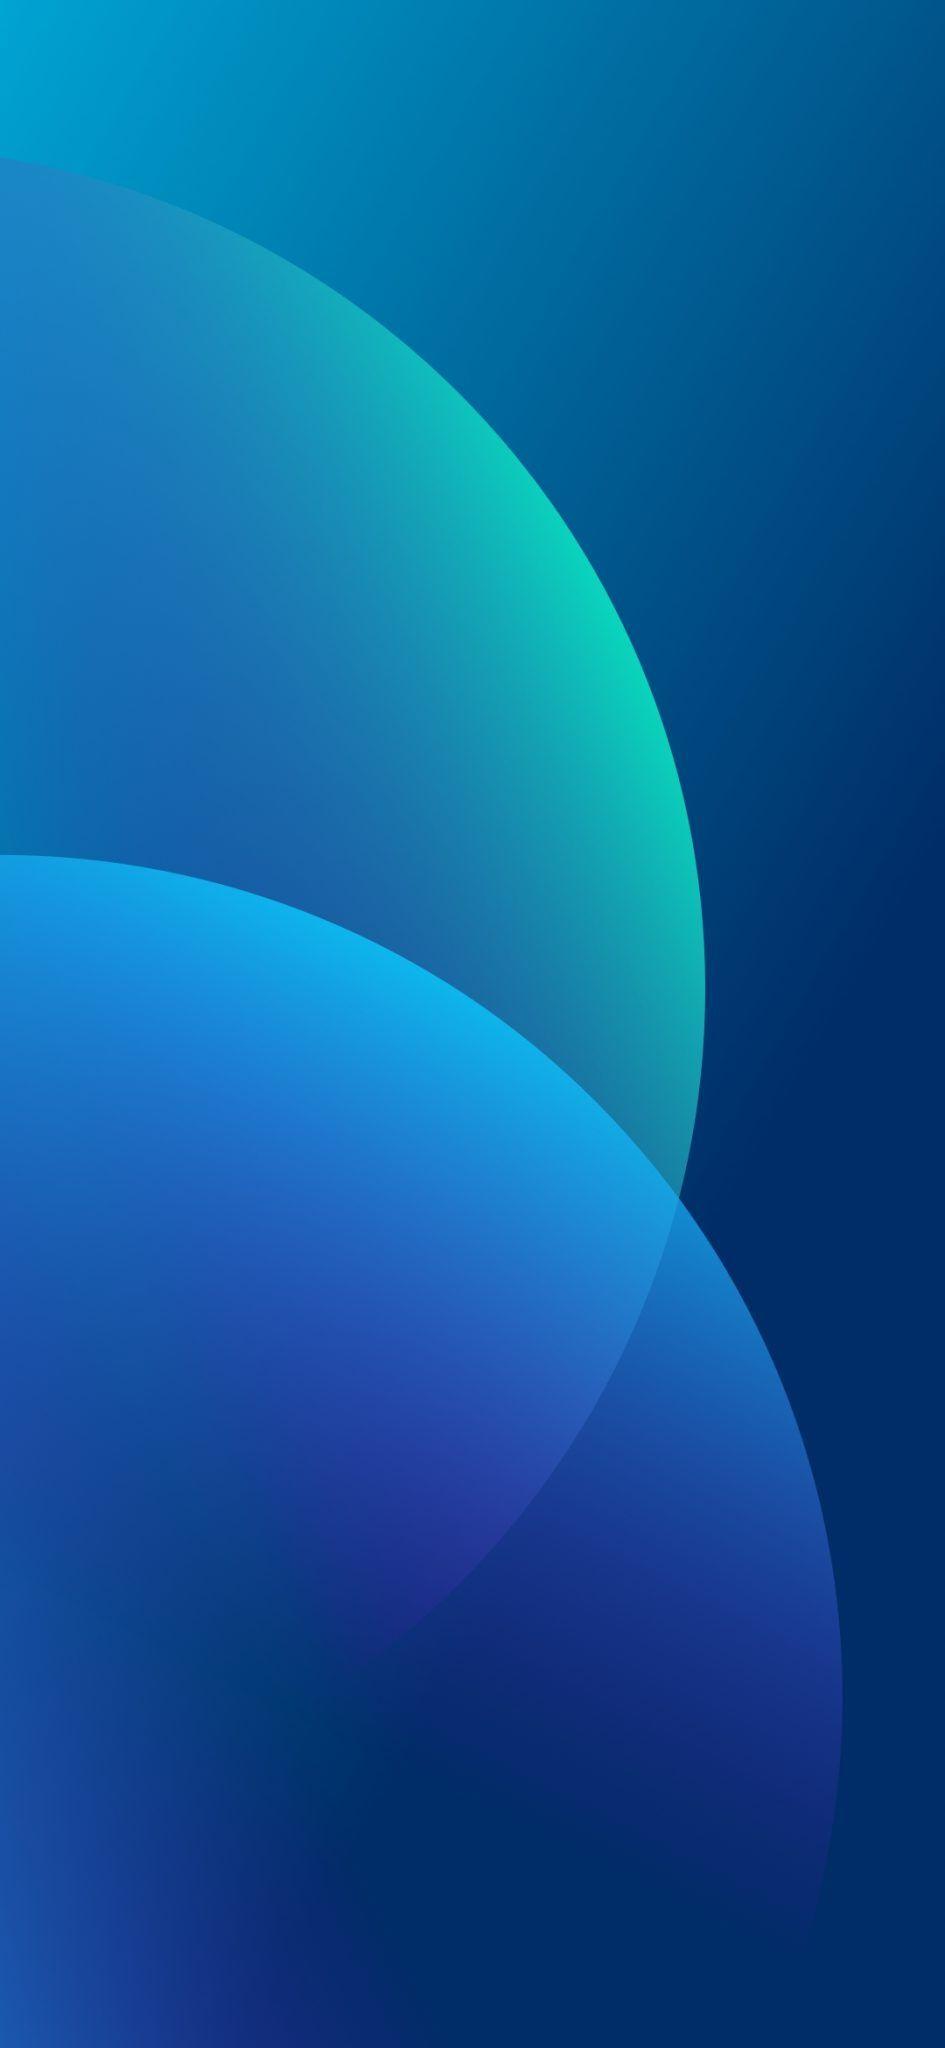 Oppo F11 Pro Wallpapers - Top Free Oppo F11 Pro Backgrounds ...